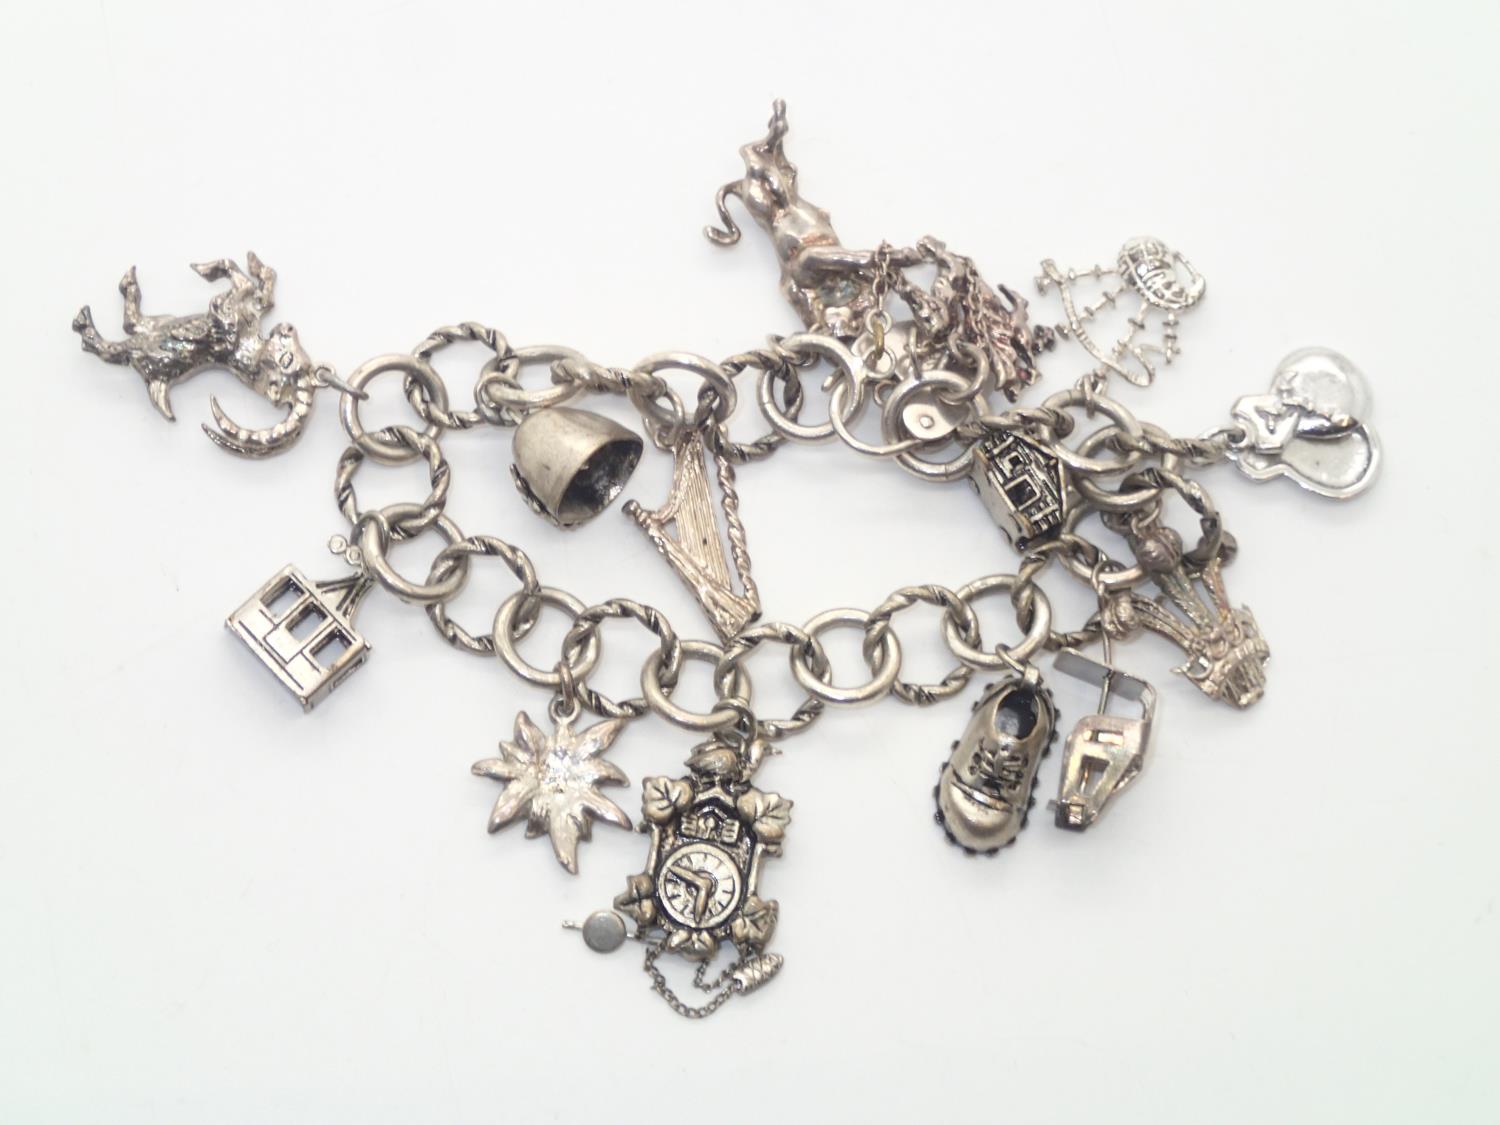 Vintage silver charm bracelet with 14 charms and padlock clasp, 45g P&P group 1 (£16 for the first